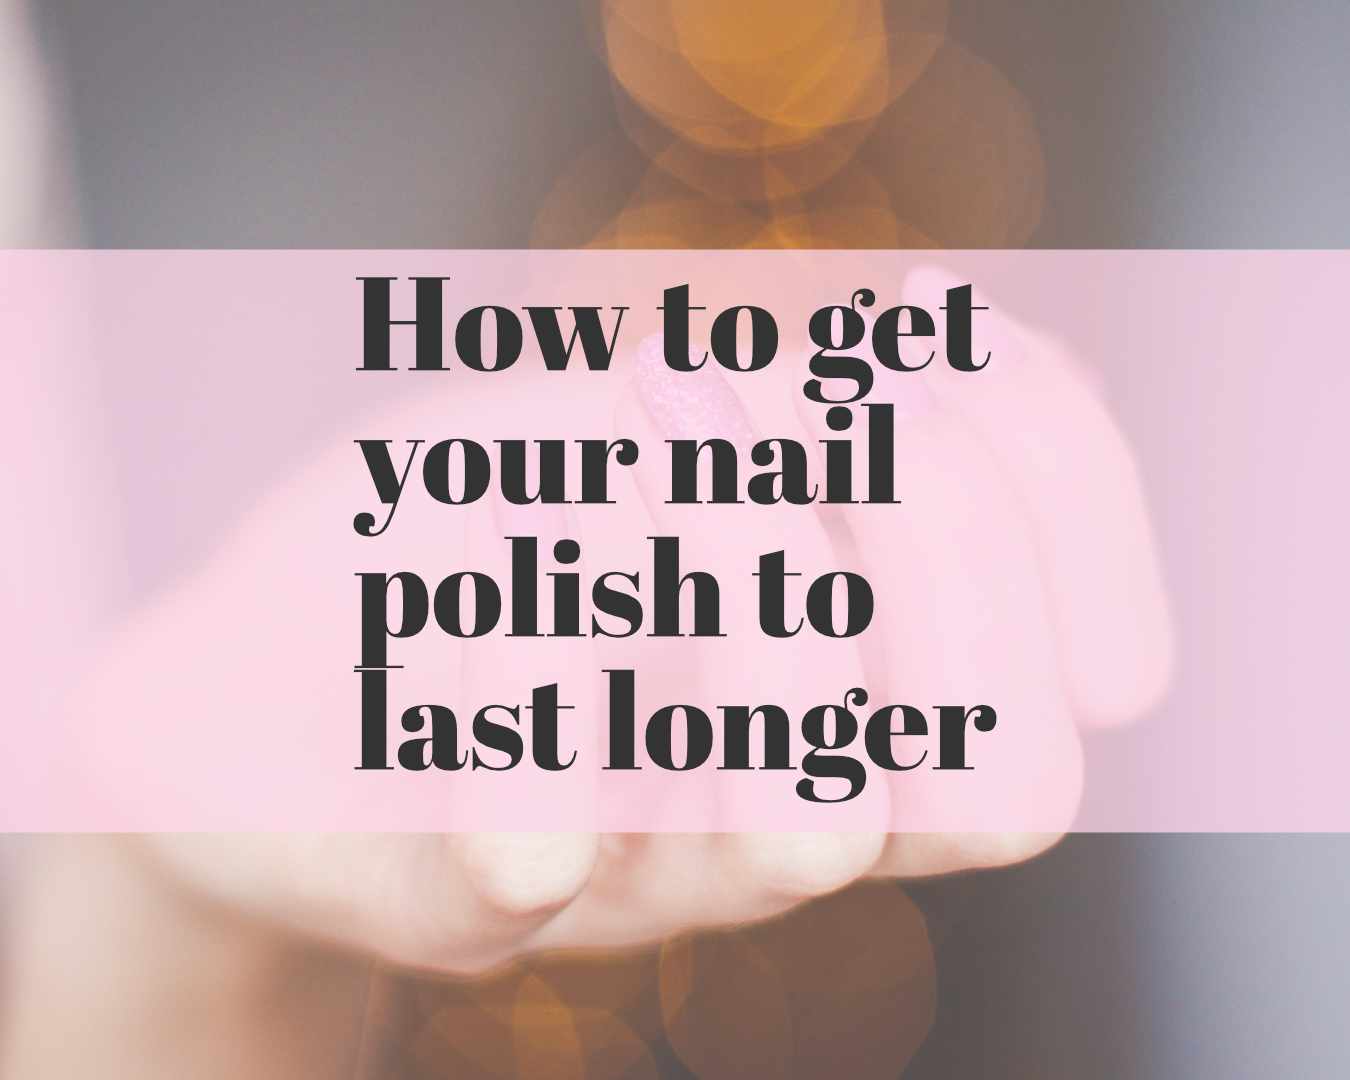 How to Match Your Nail Polish to Your Outfit - wide 9